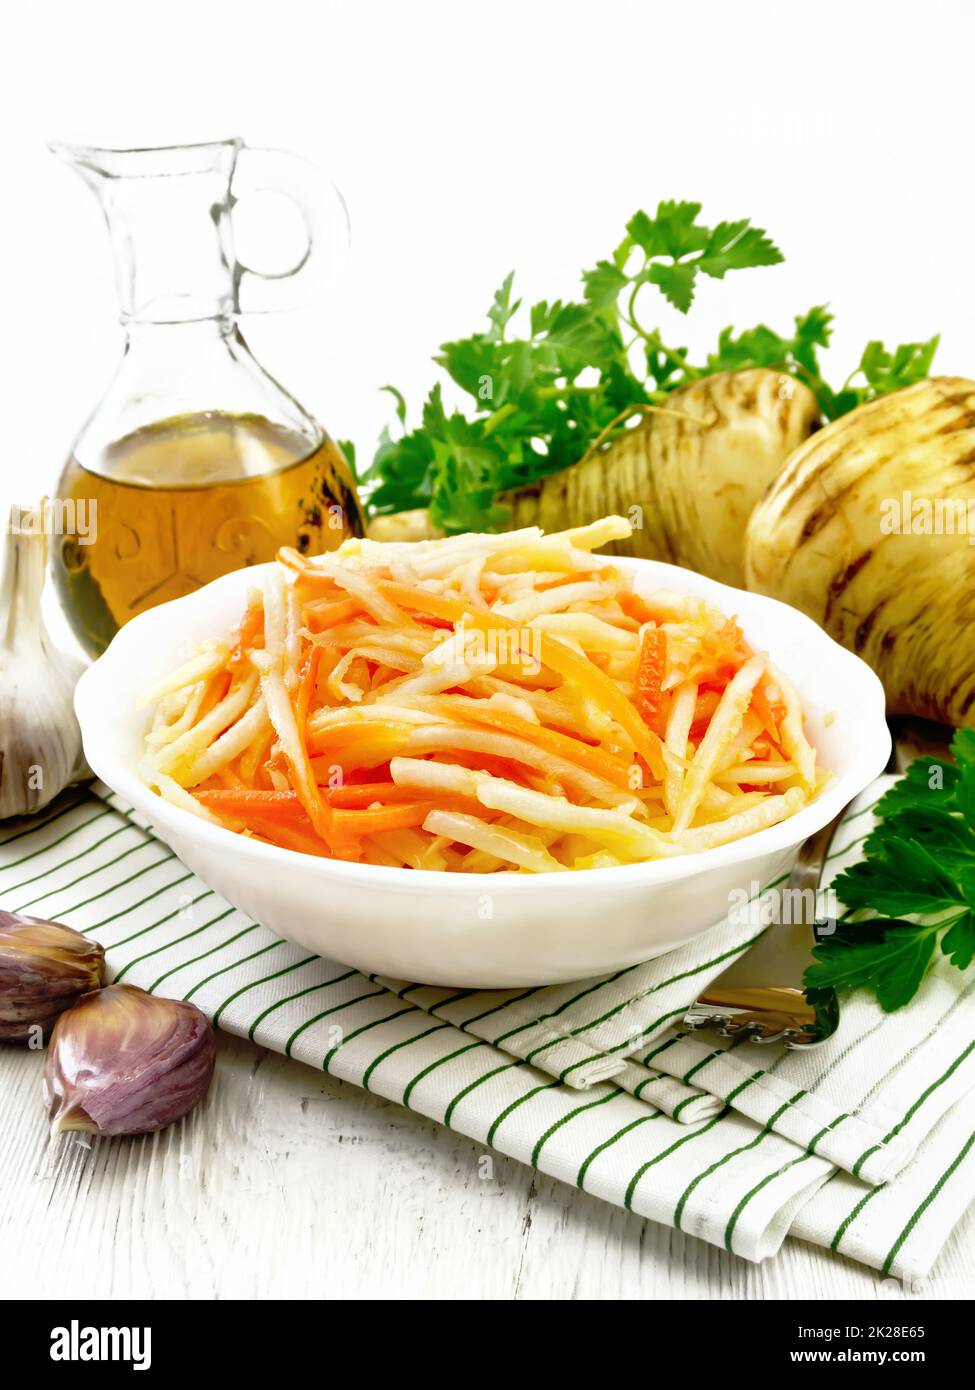 Salad of parsnip and carrot on table Stock Photo